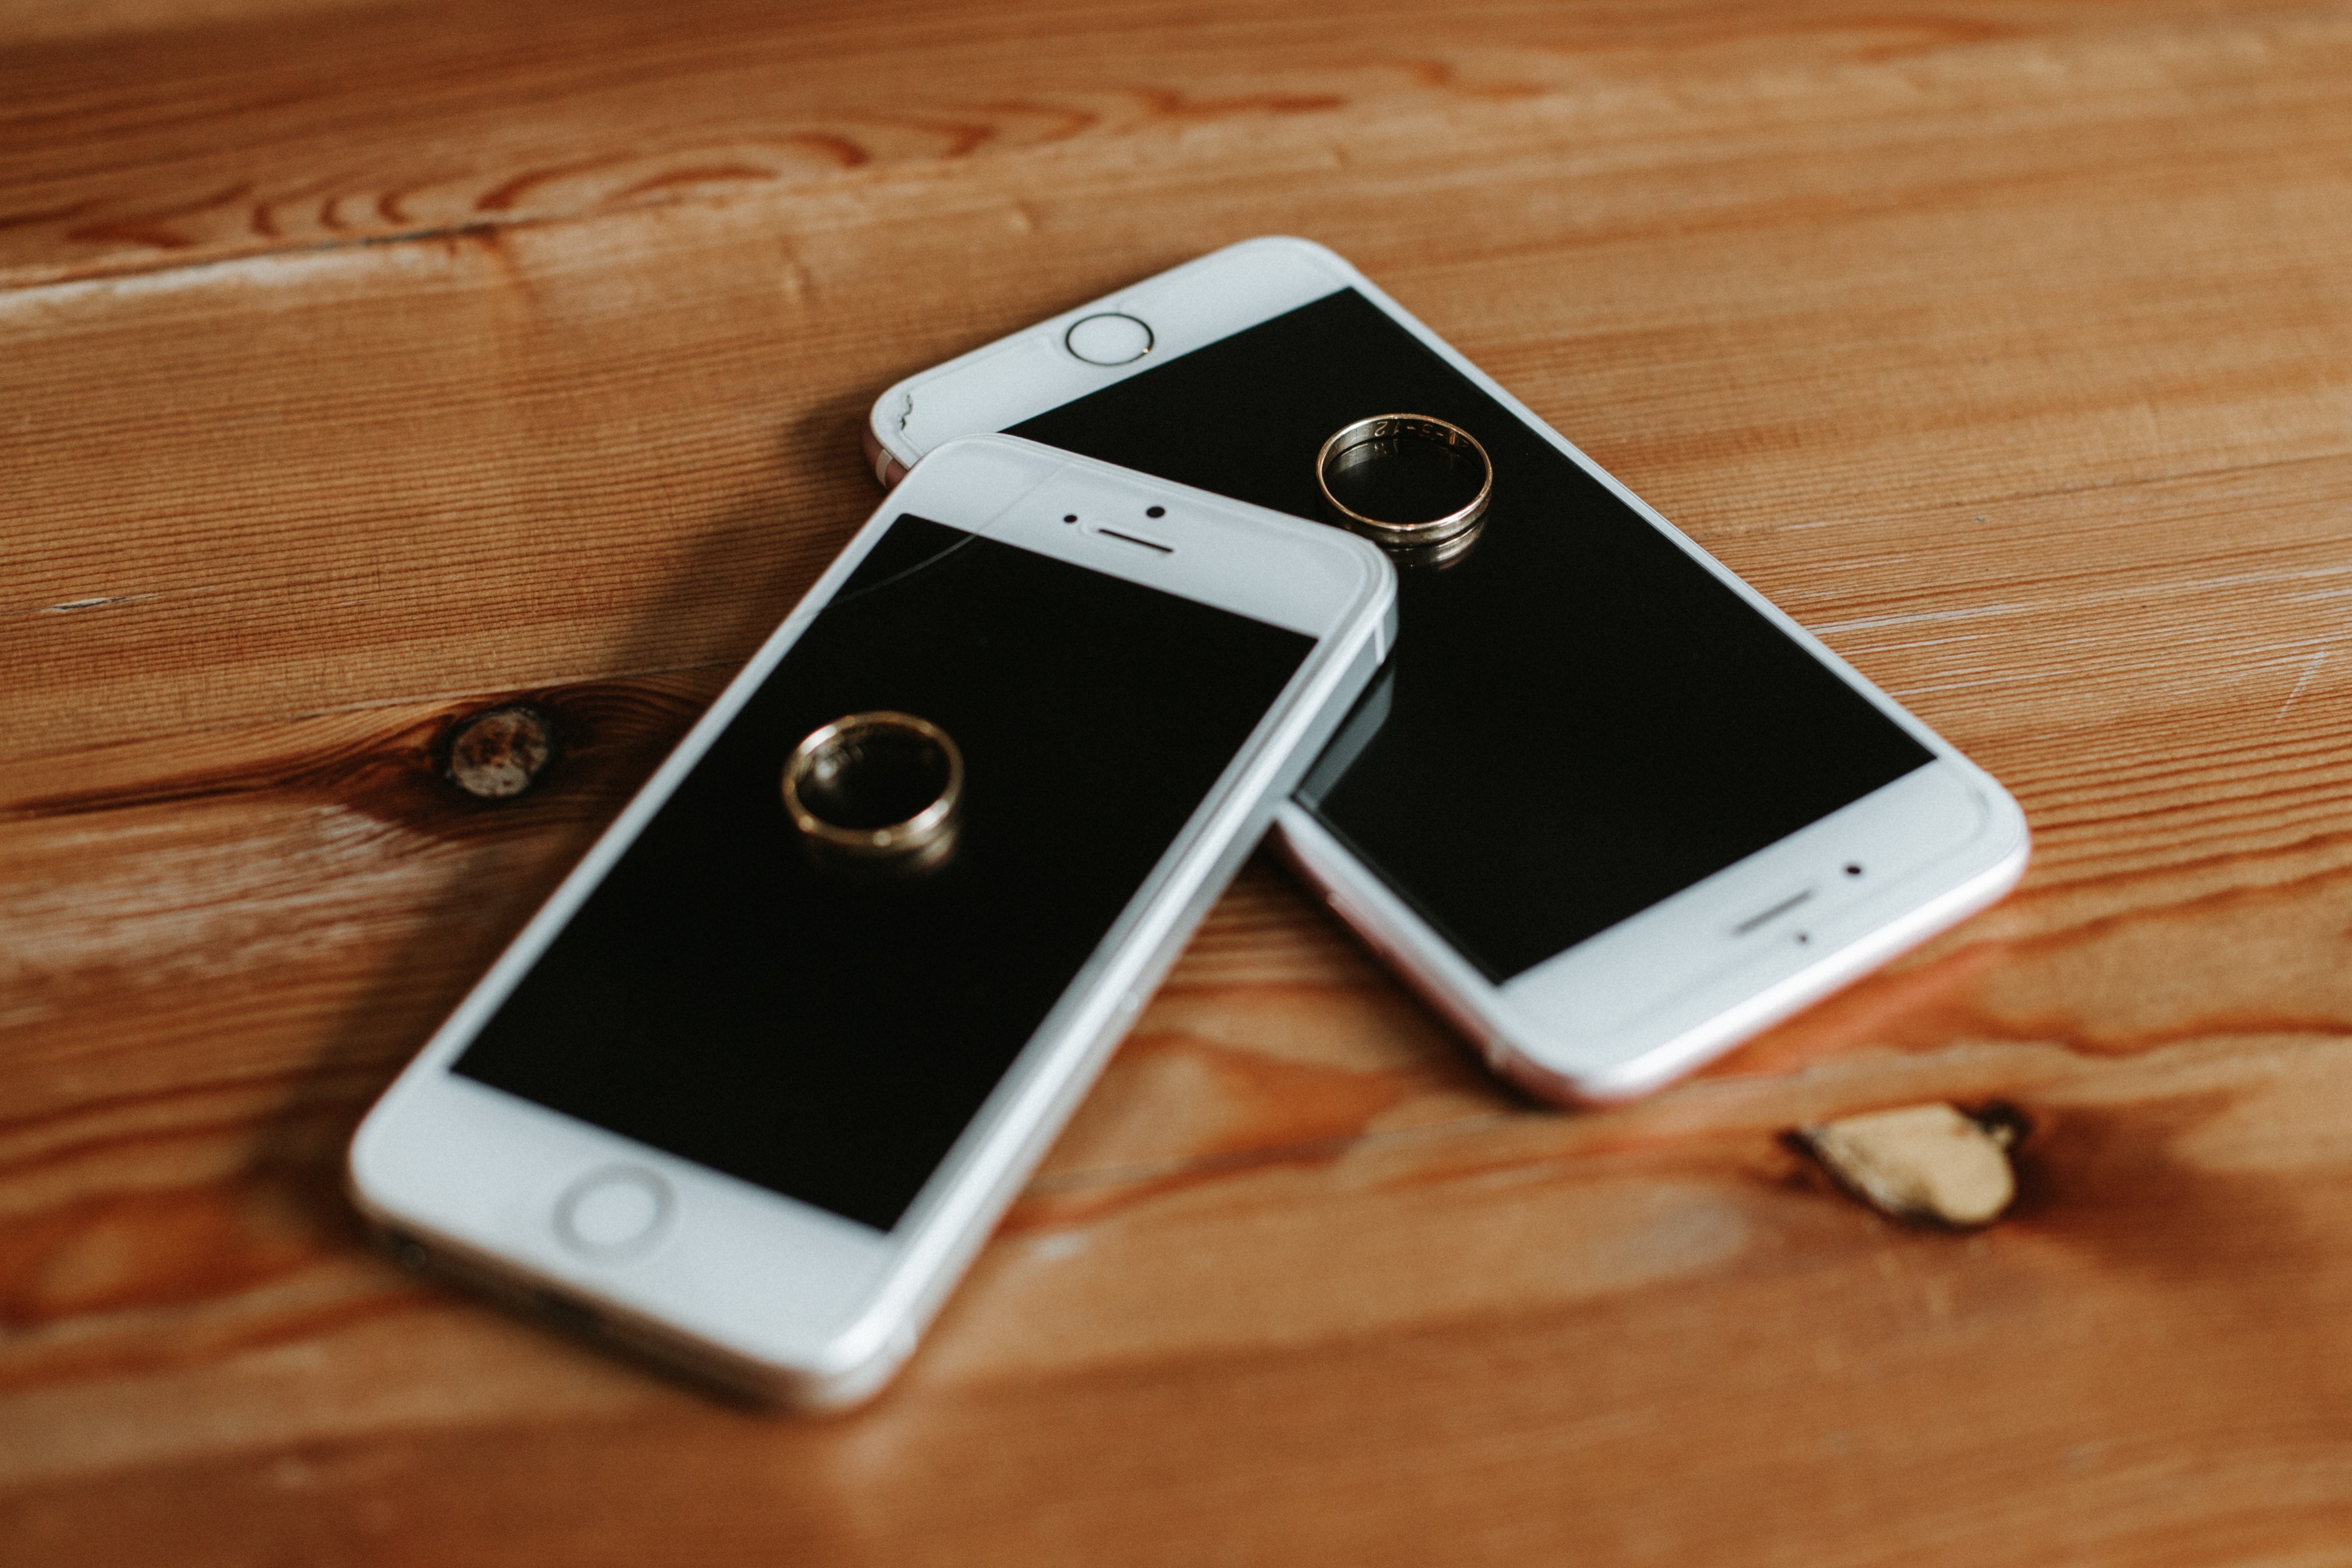 Two Rose Gold Iphone 6s on Brown Wooden Surface, Modern, Wood, Wireless, Telephone, HQ Photo